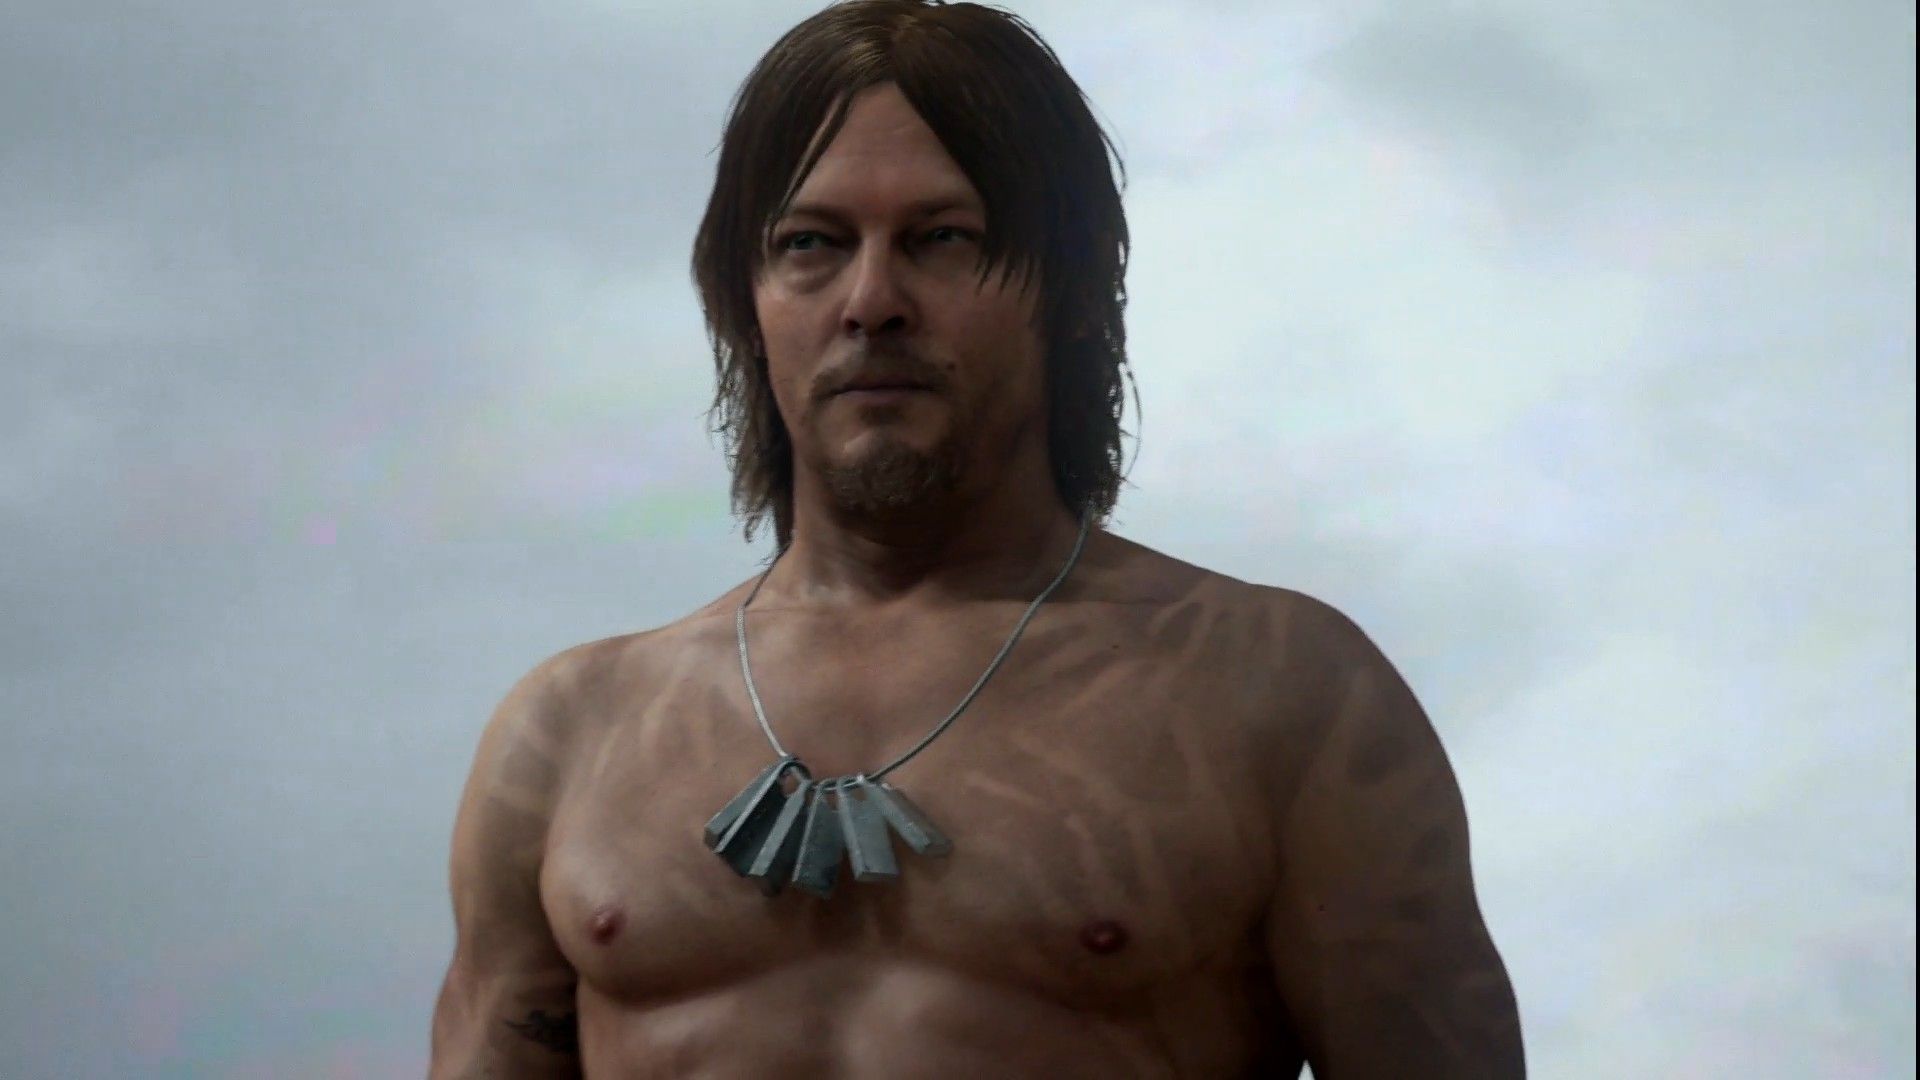 Hideo Kojima is working on a new title that appears to be set in the Death Stranding universe